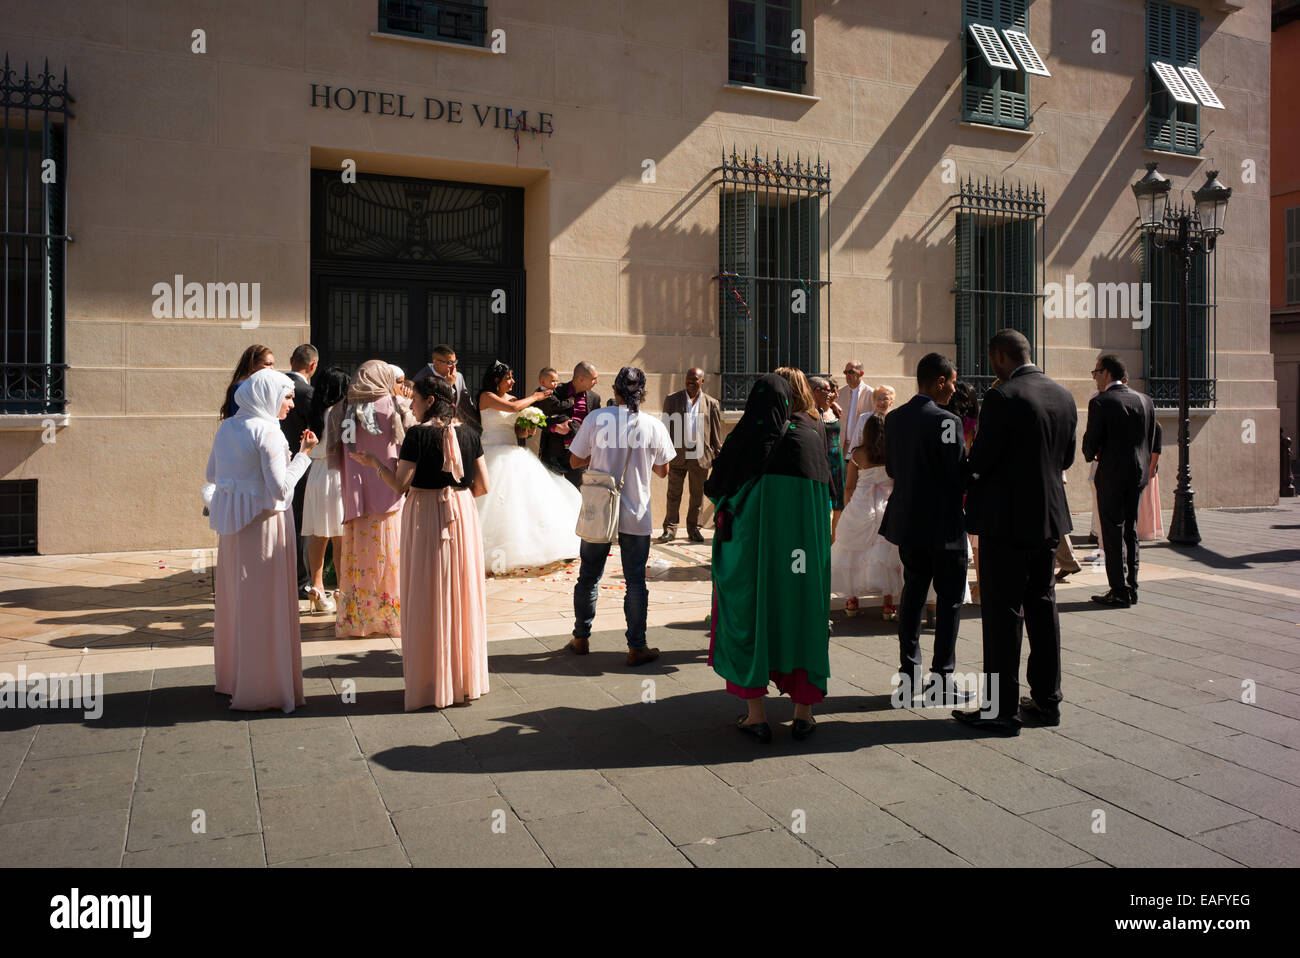 French Arab wedding  in front of the Hotel de Ville, Nice, France. Stock Photo